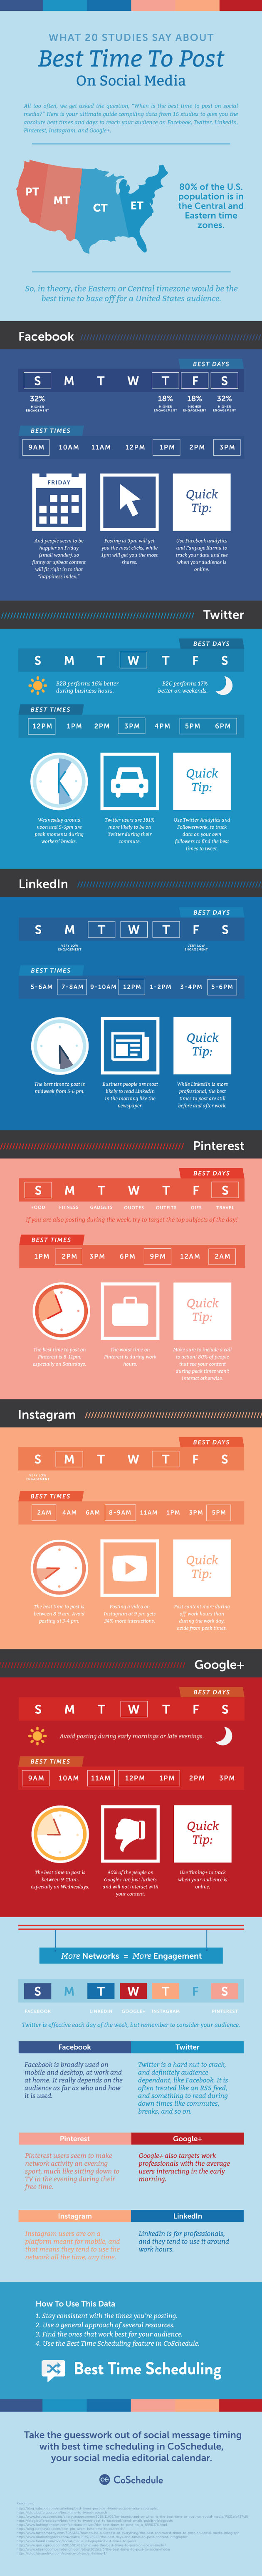 infographic - best times to post on social media